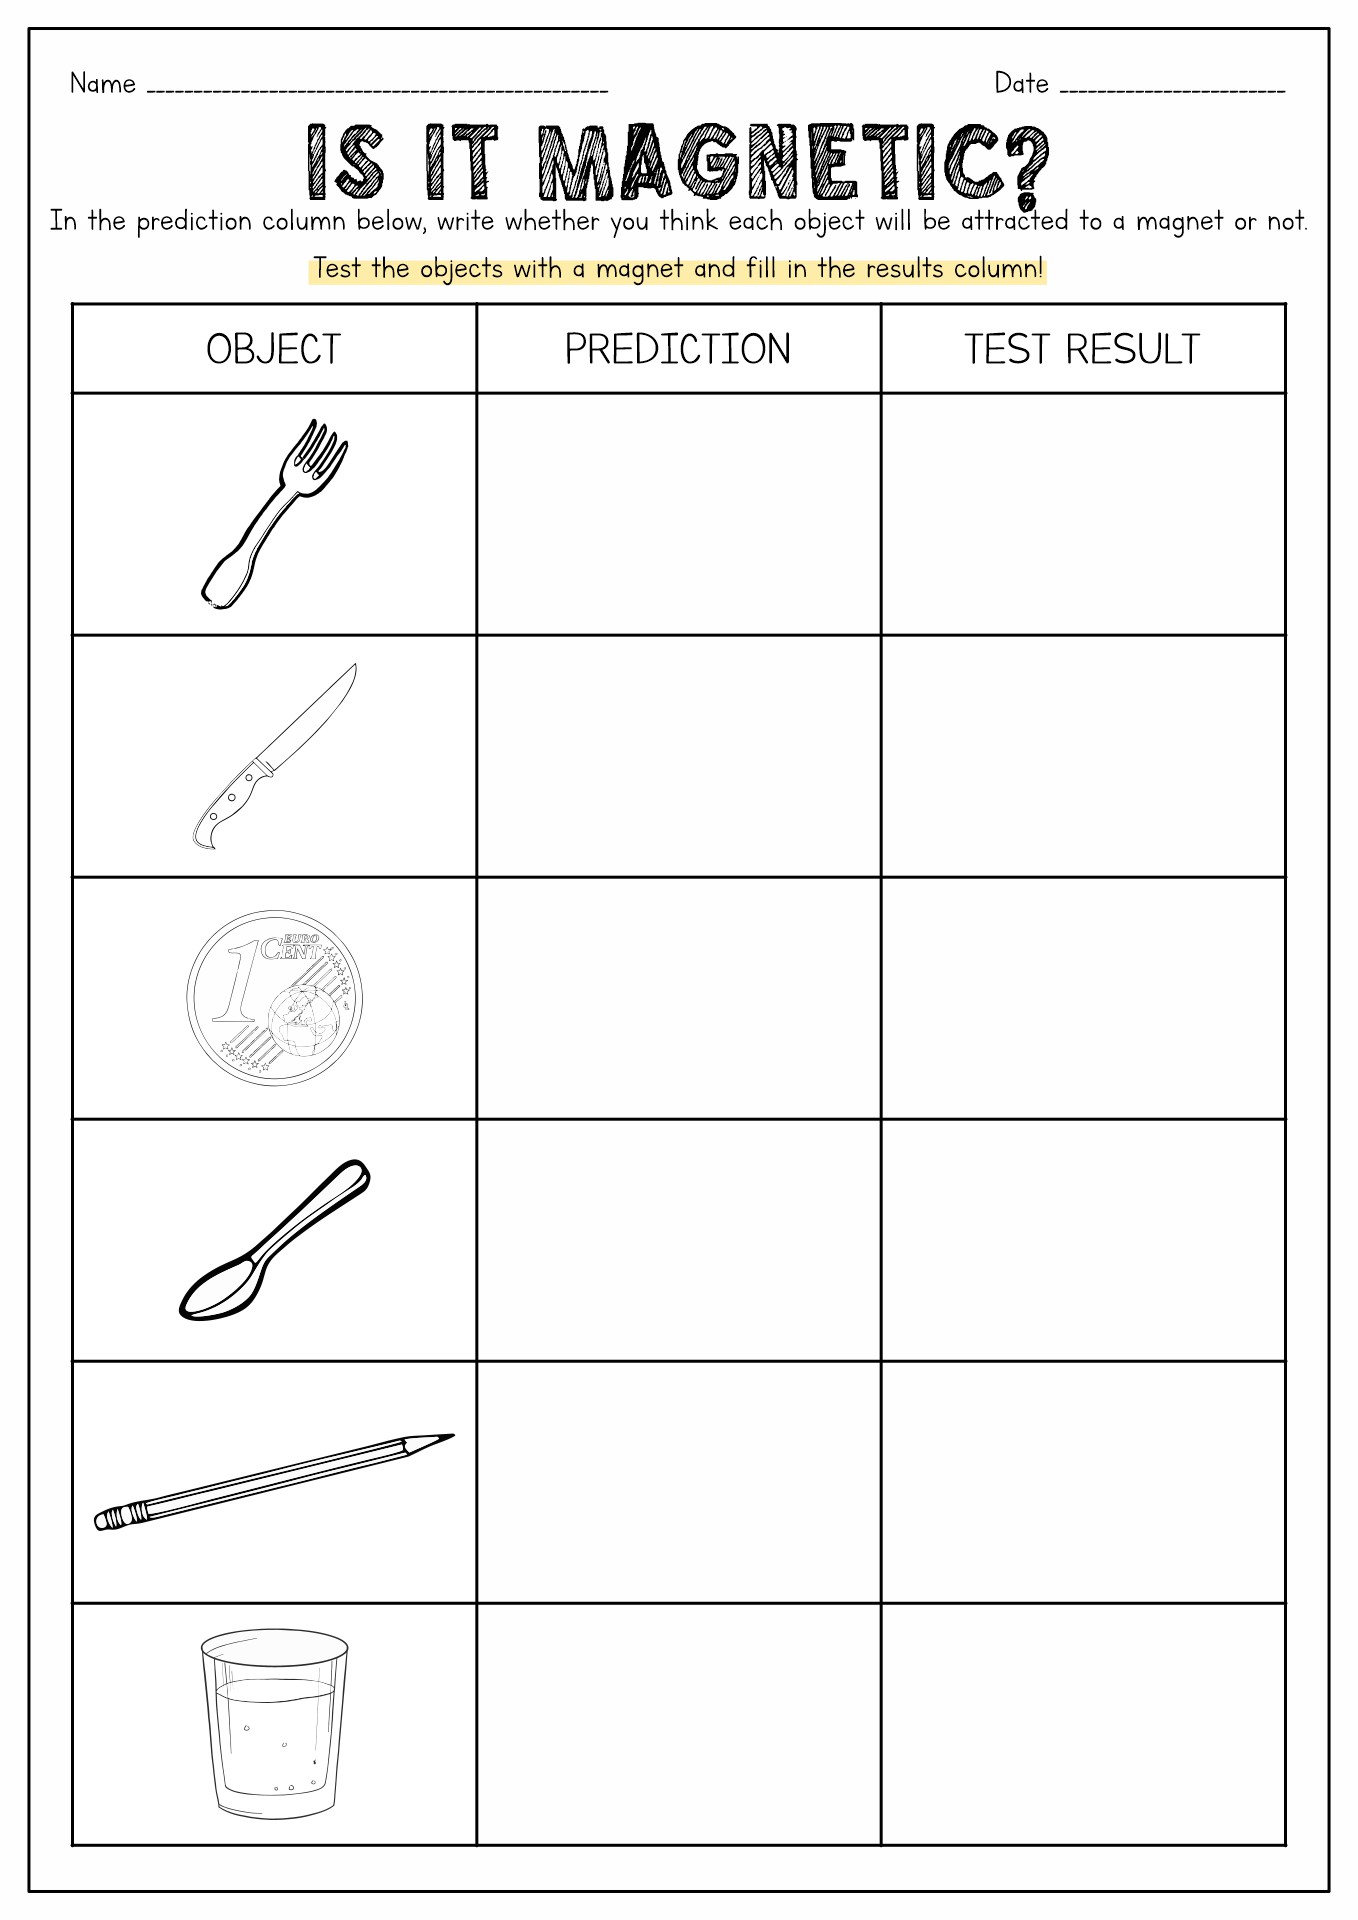 Magnetic Objects Worksheet Image